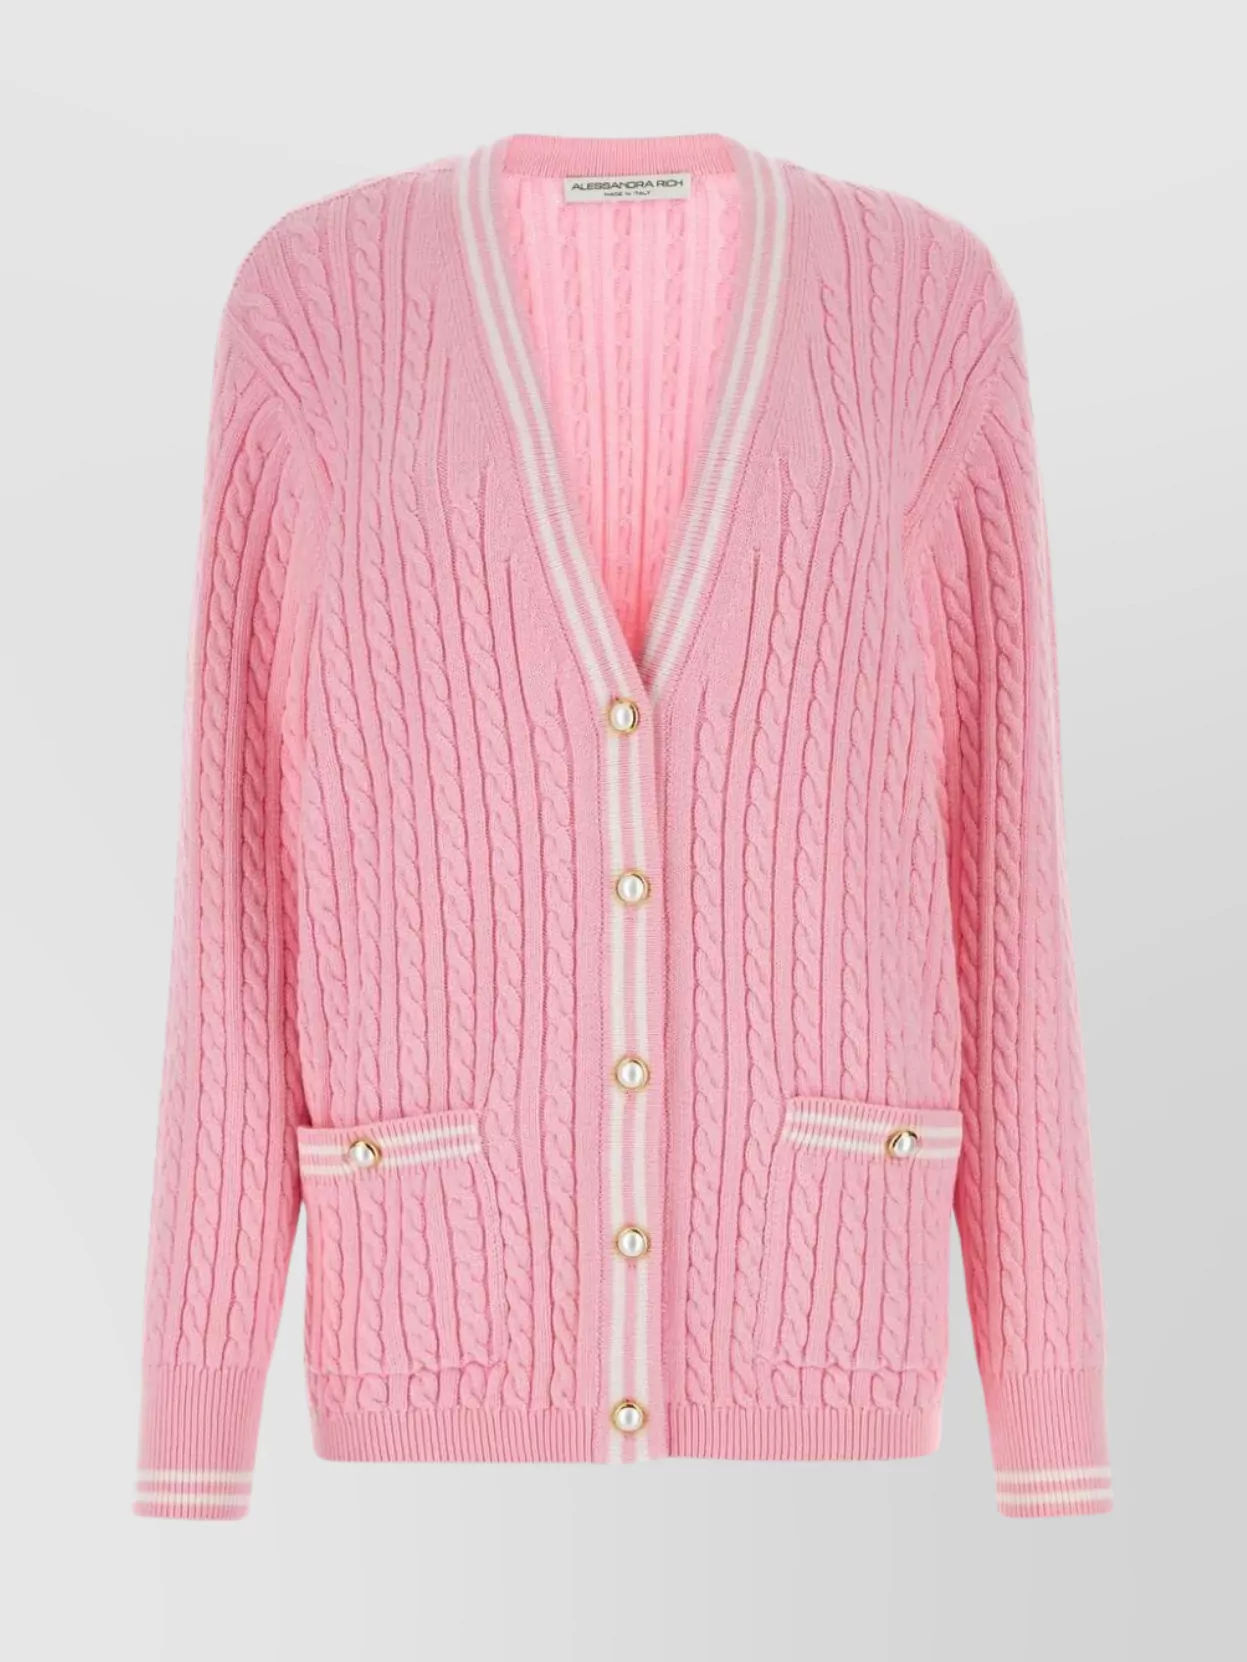 ALESSANDRA RICH TEXTURED CABLE KNIT CARDIGAN